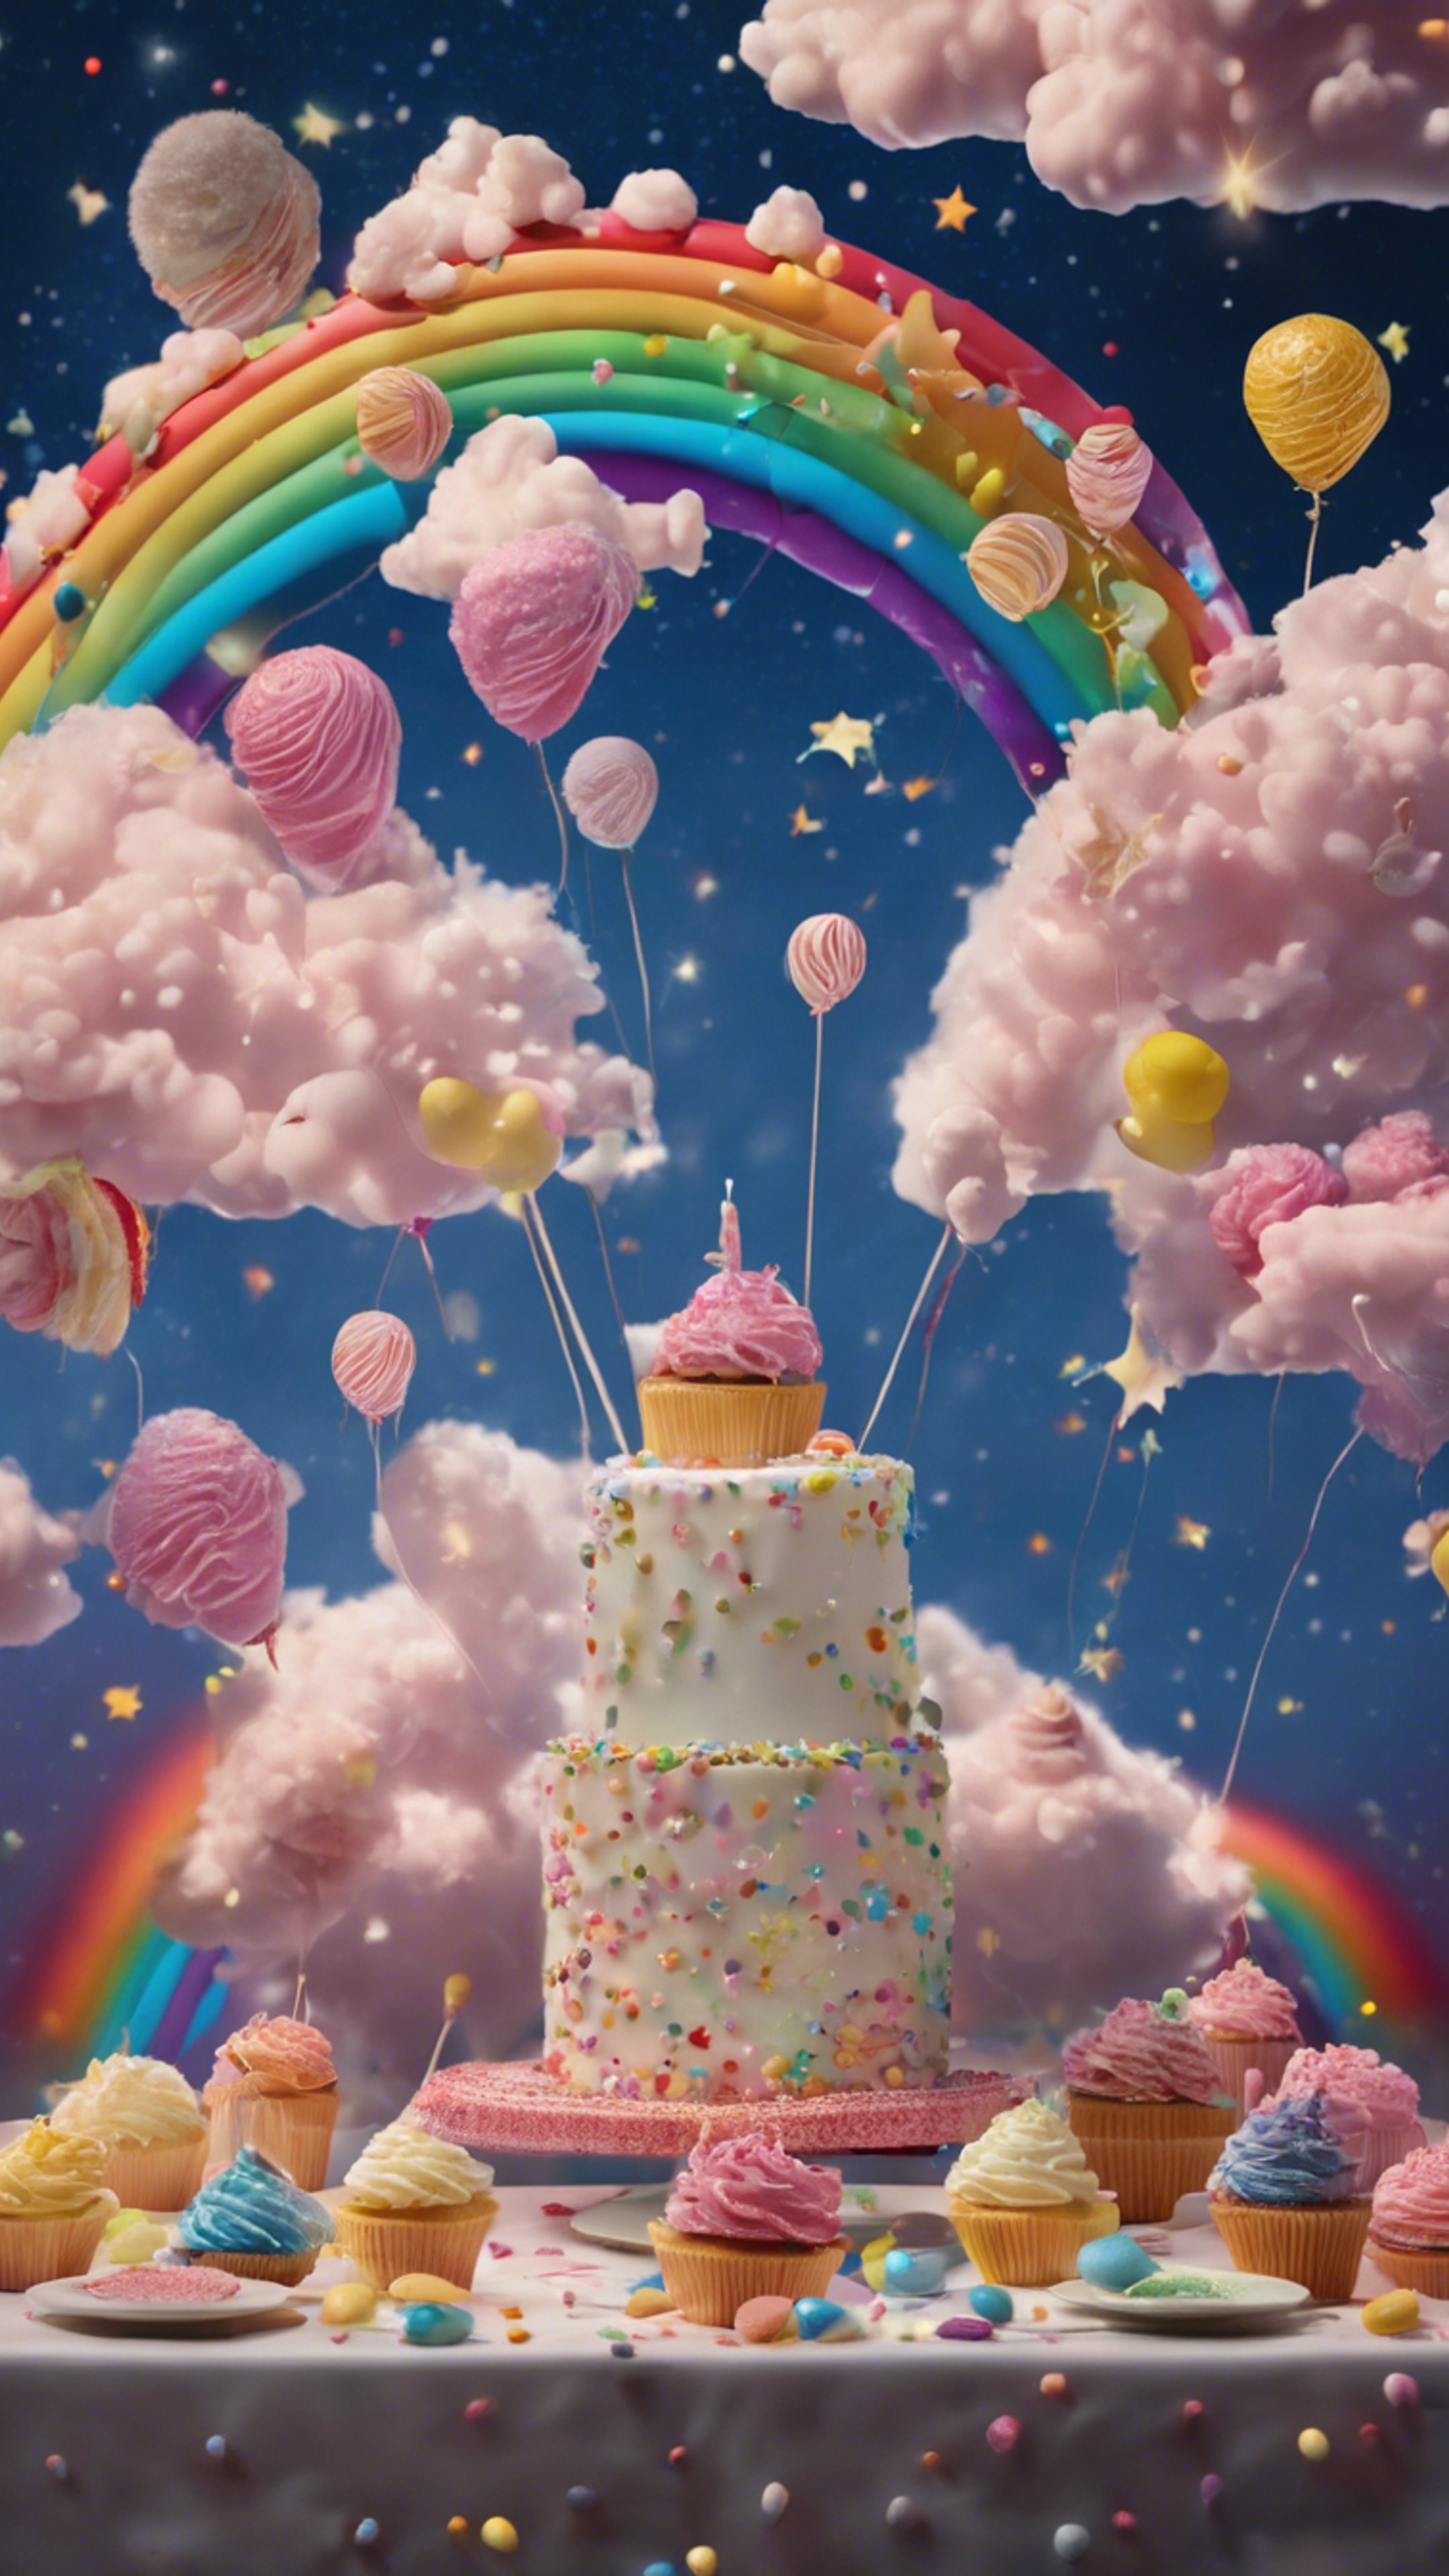 Surreal representation of a birthday party with floating cakes, candies amid fluffy clouds and rainbows discordantly juxtaposed against a starry night sky. Wallpaper[7f18c2fd7760424e83fc]